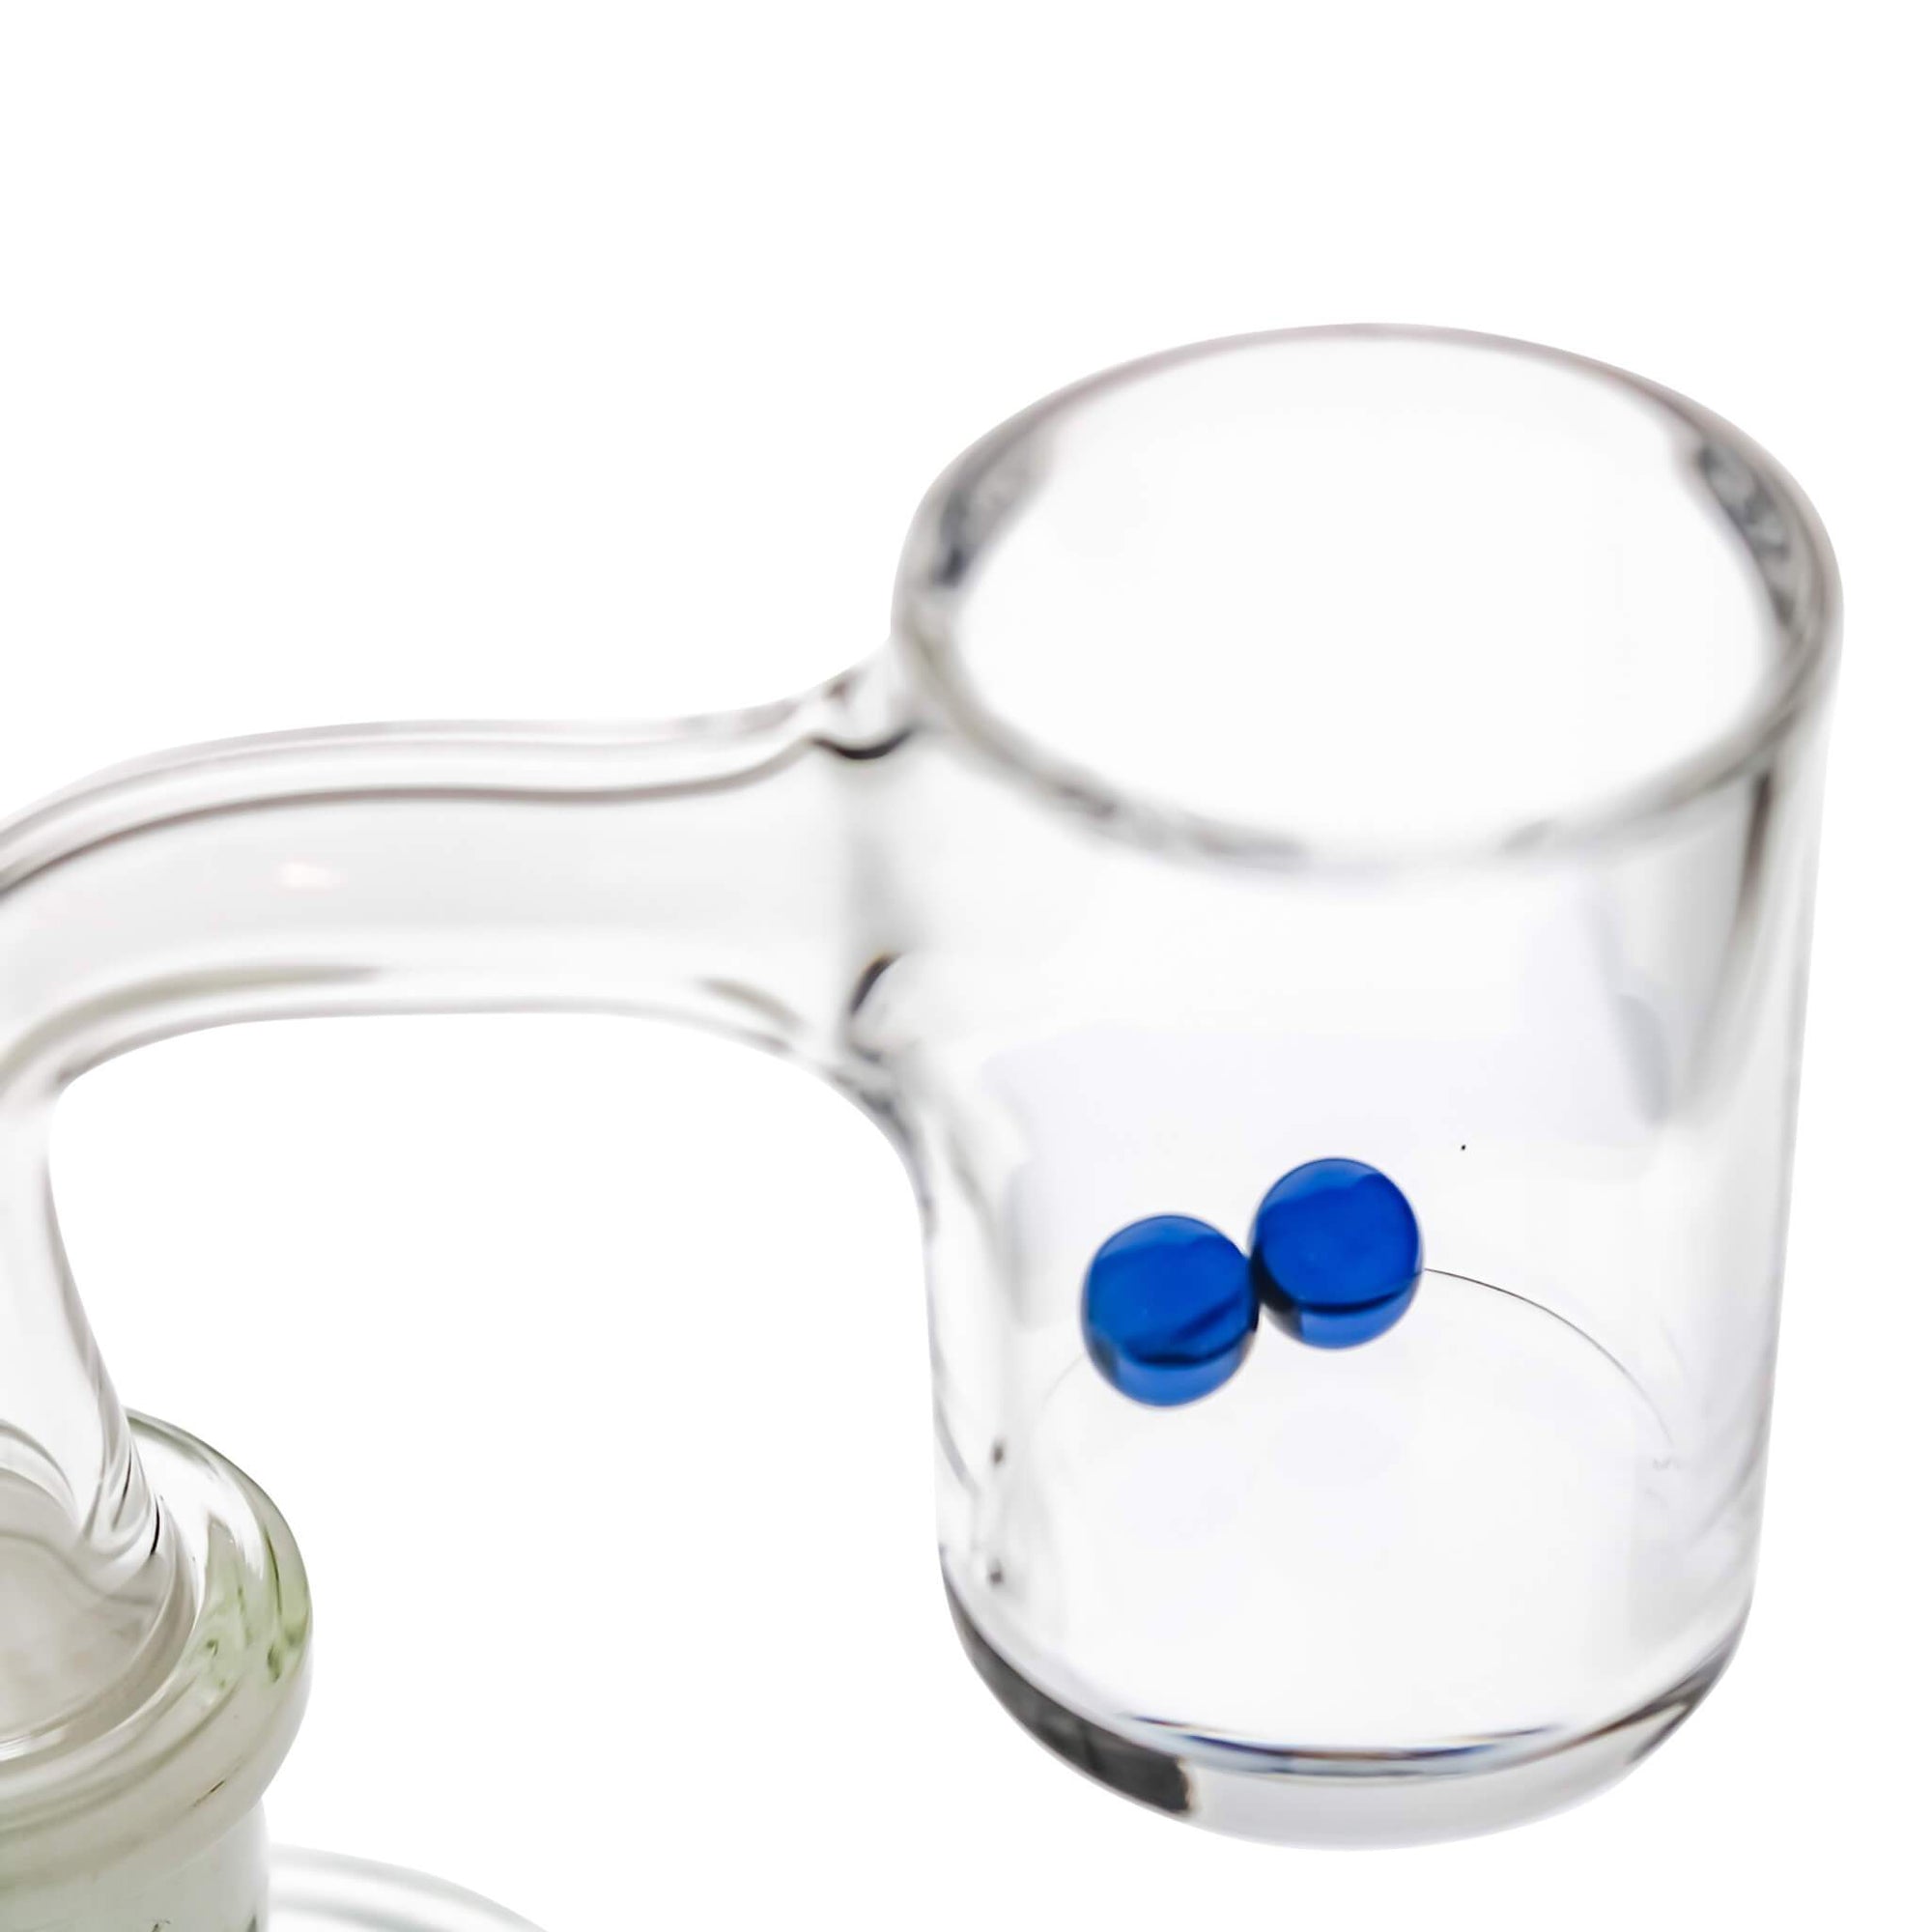 6mm Terp (Dab) Pearls | Blue Crystal Dab Pearls In Banger | the dabbing specialists